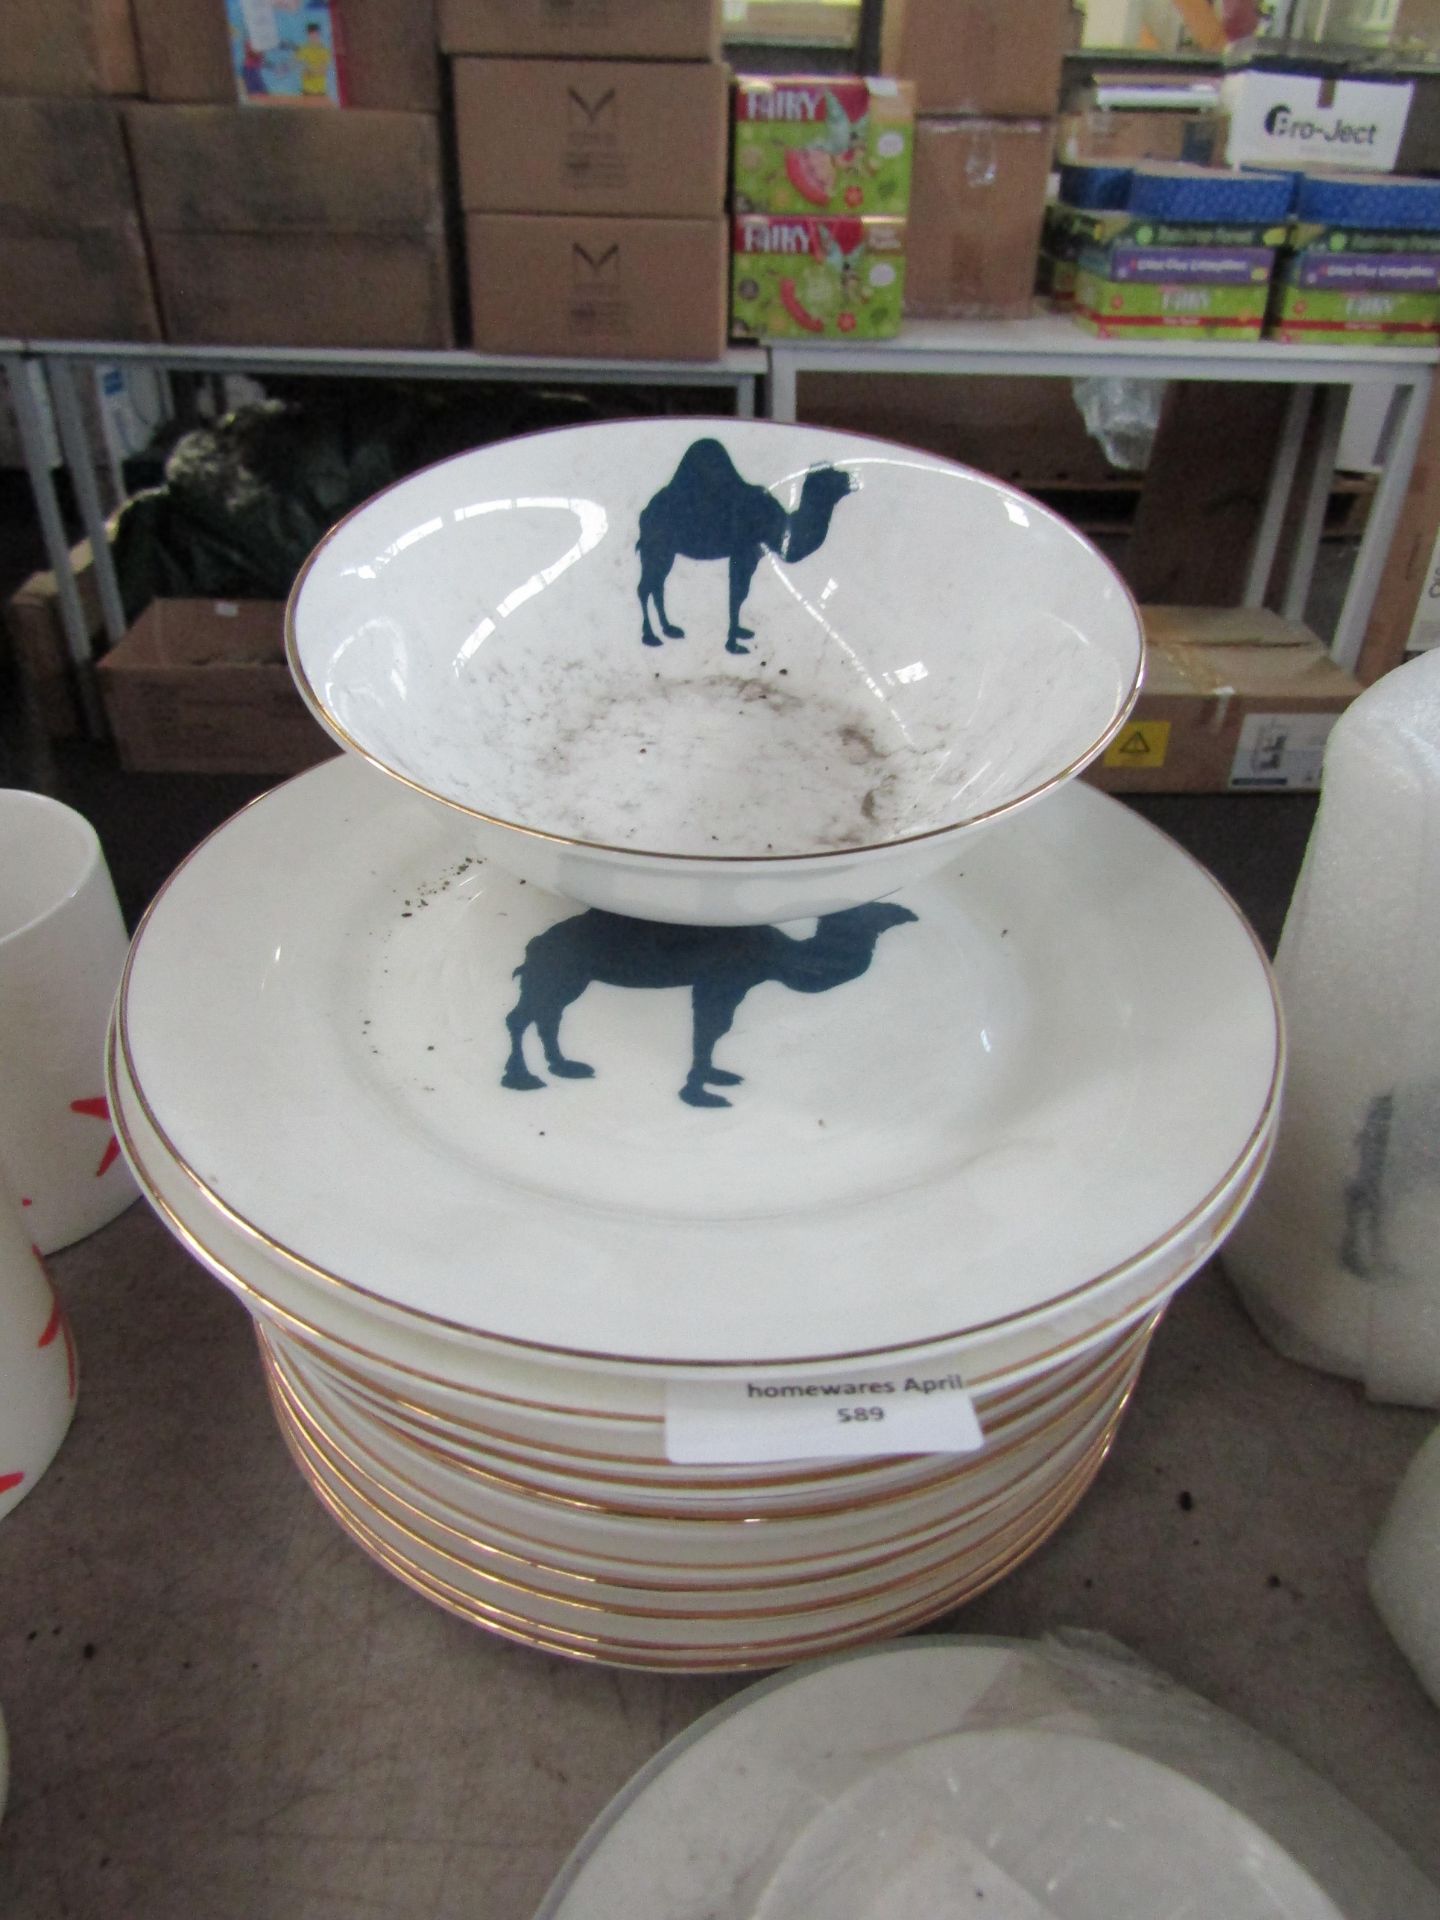 Mixed Lot of 18 x Homeware Outlet Customer Returns for Repair or Upcycling - Total RRP approx